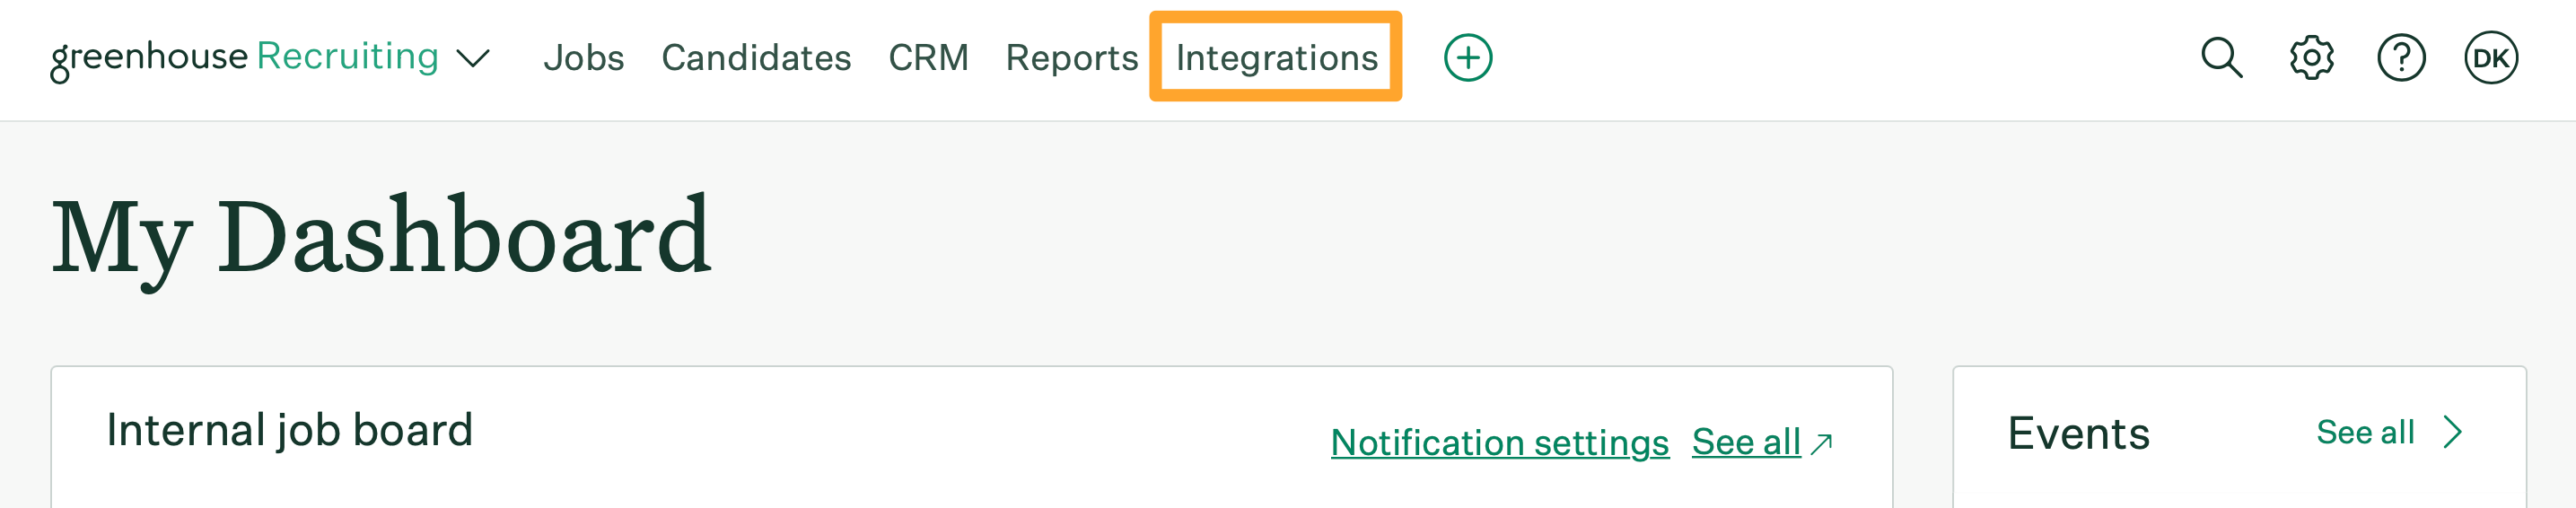 The My Dashboard page shows the Integration button highlighted in marigold at the top of the page